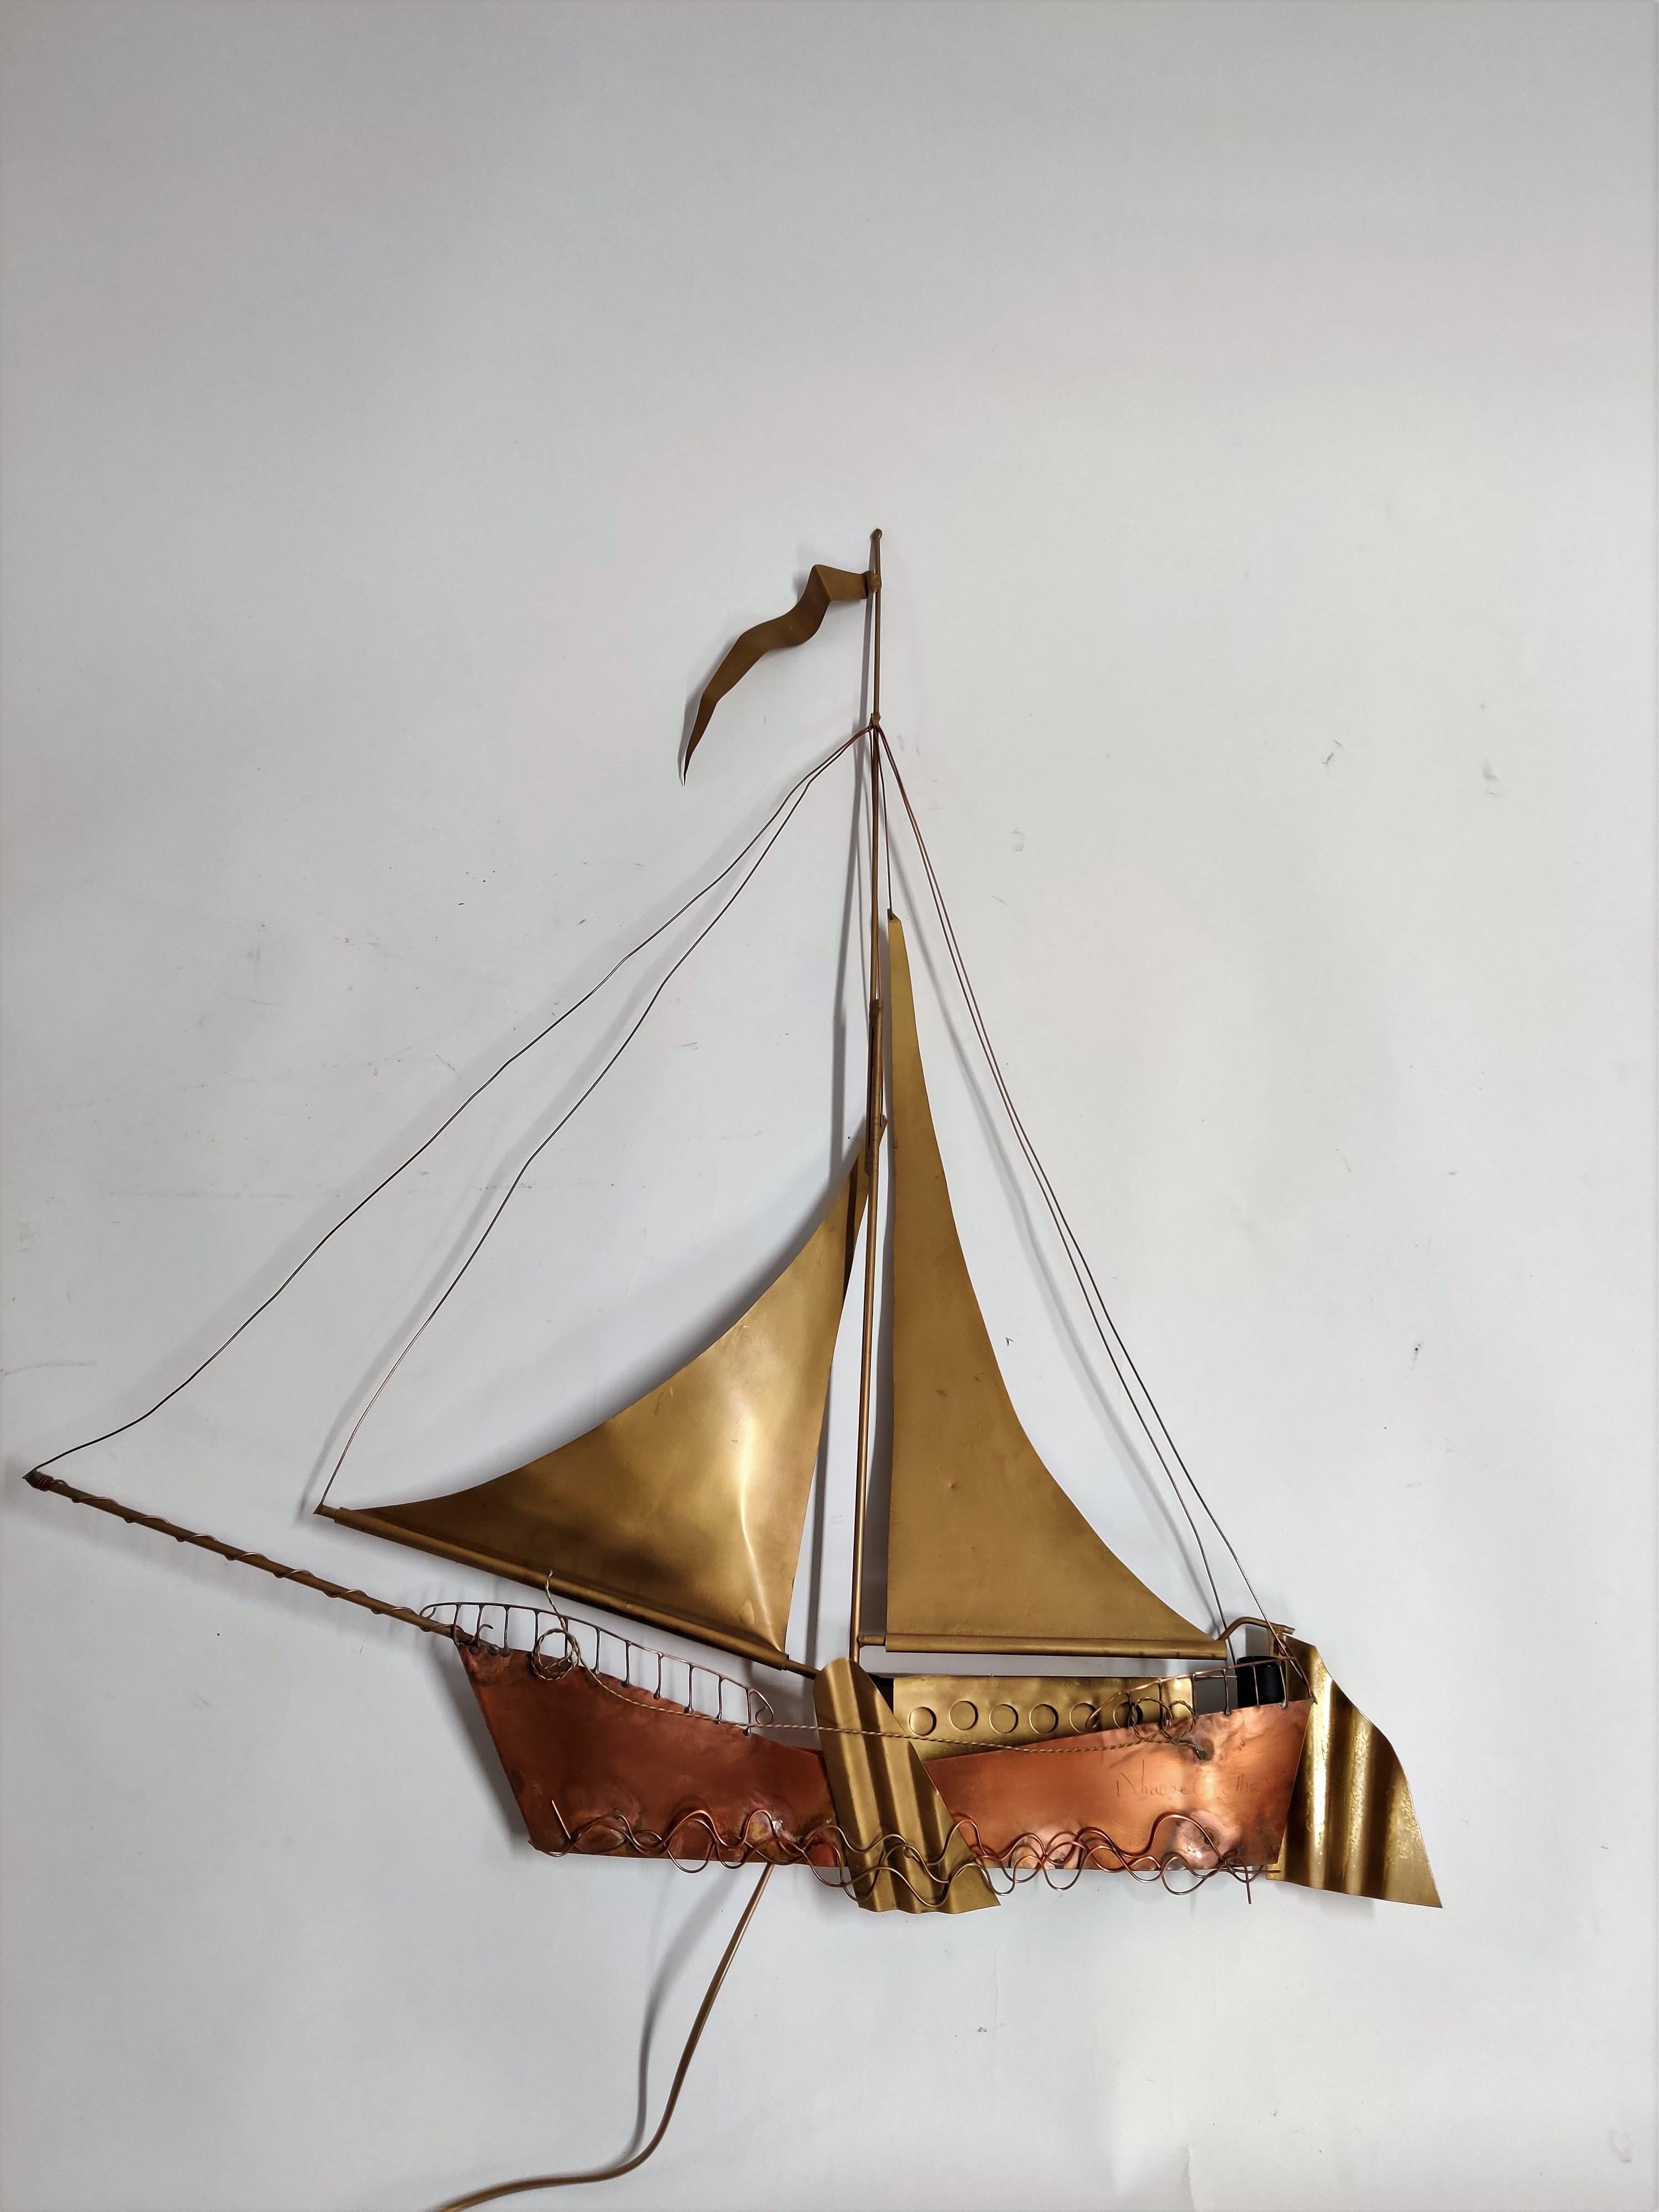 Large, handmade copper and brass wall light sculpture in the shape of a sailing ship by Belgian artist Daniel Dhaeseleer. 

The piece is signed at the front. Two screw bulb light fittings are worked into the frame, creating a wonderful shadow